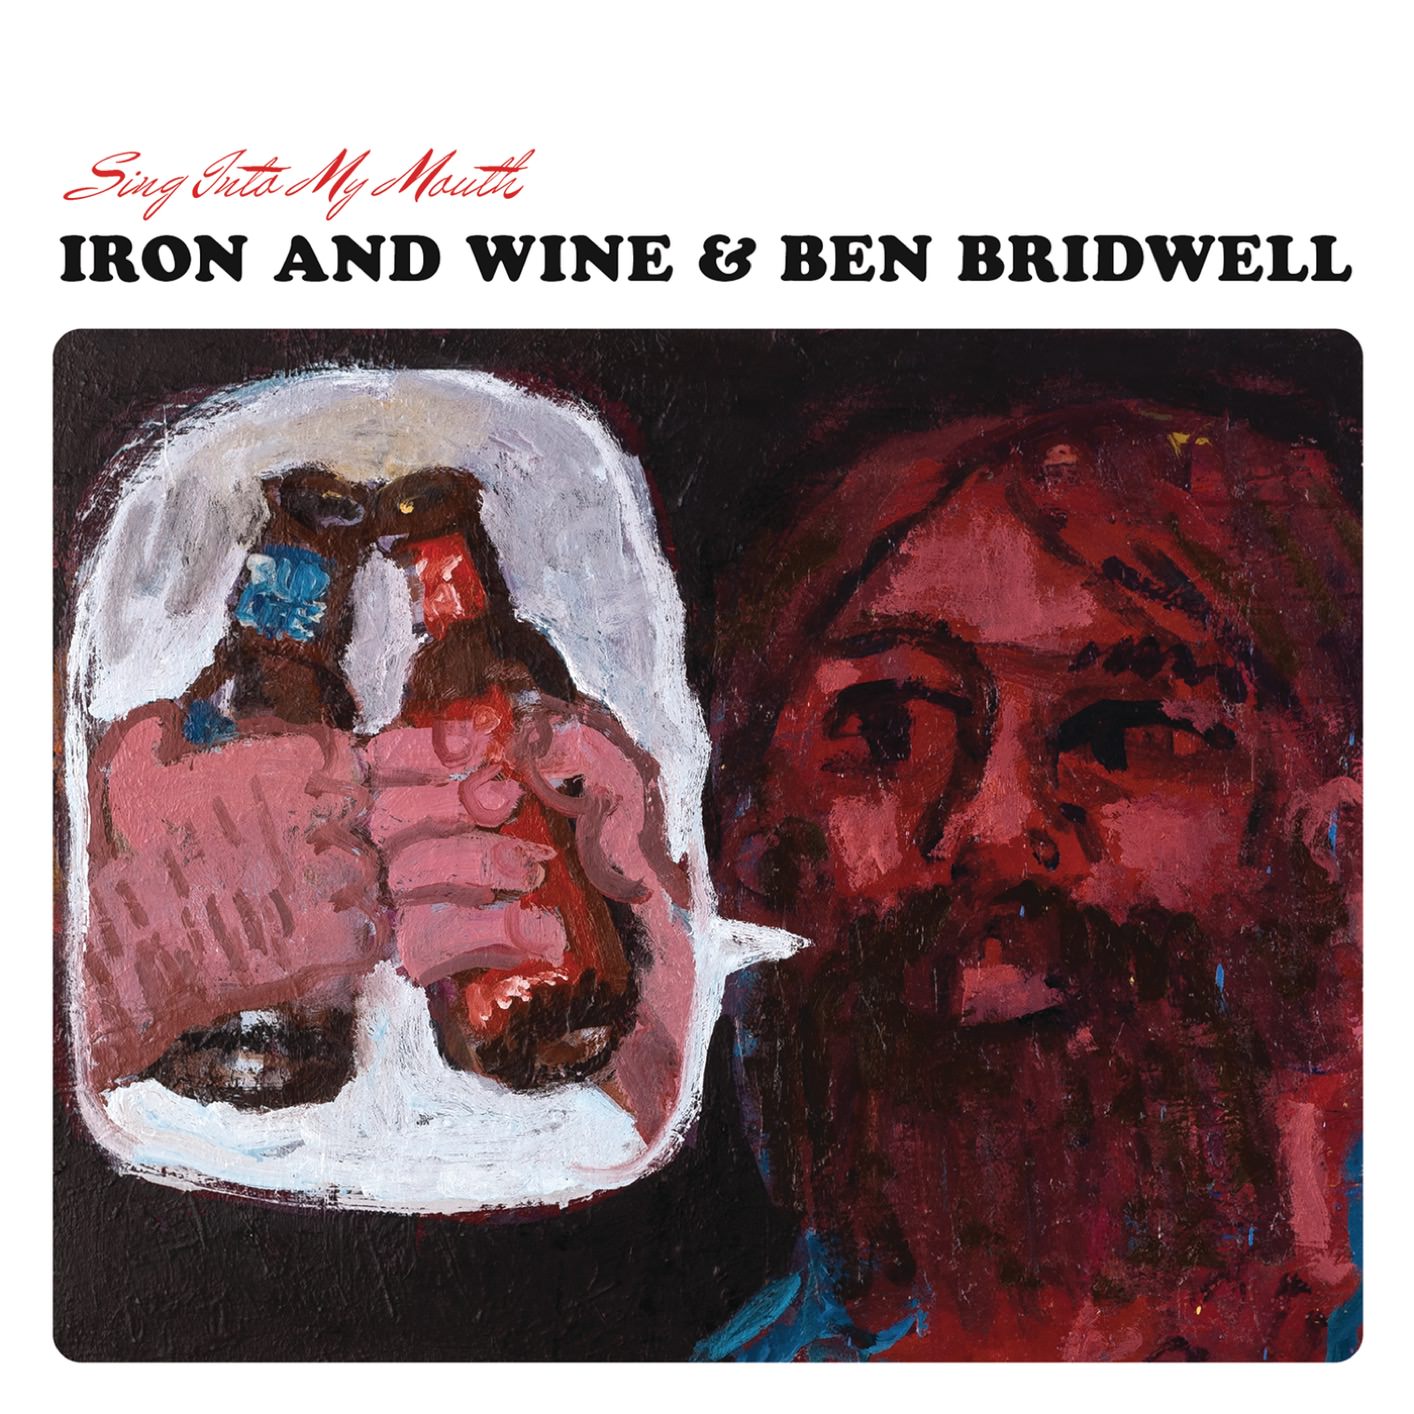 Iron And Wine & Ben Bridwell - Sing Into My Mouth (2015) [Qobuz FLAC 24bit/44,1kHz]